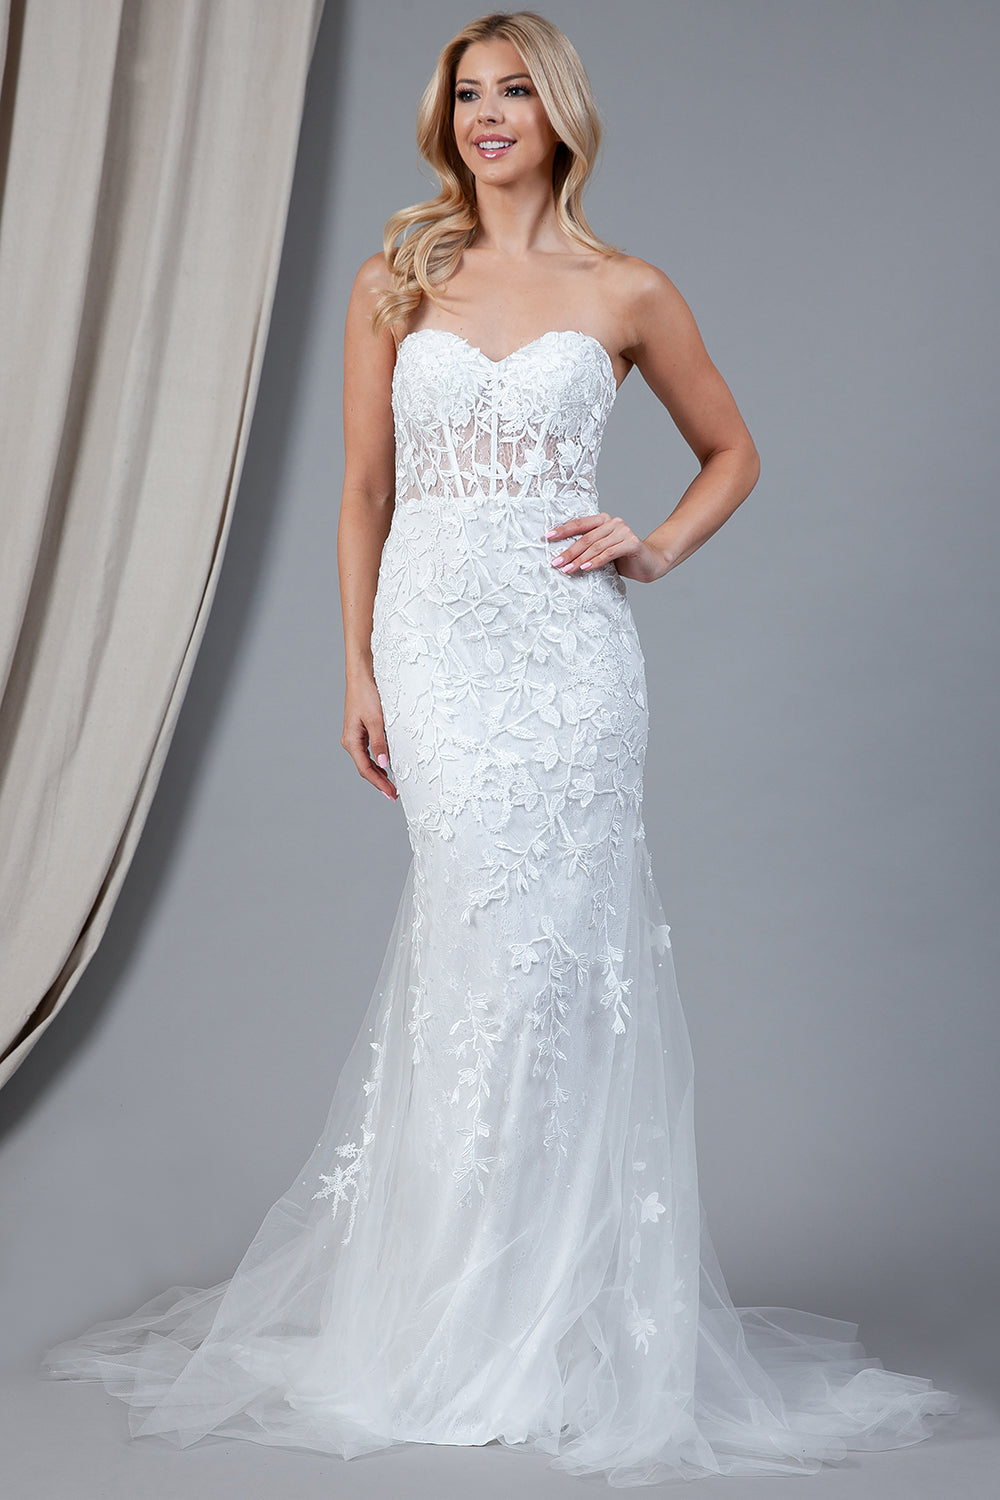 Floral Embroidered Strapless Wedding Dress